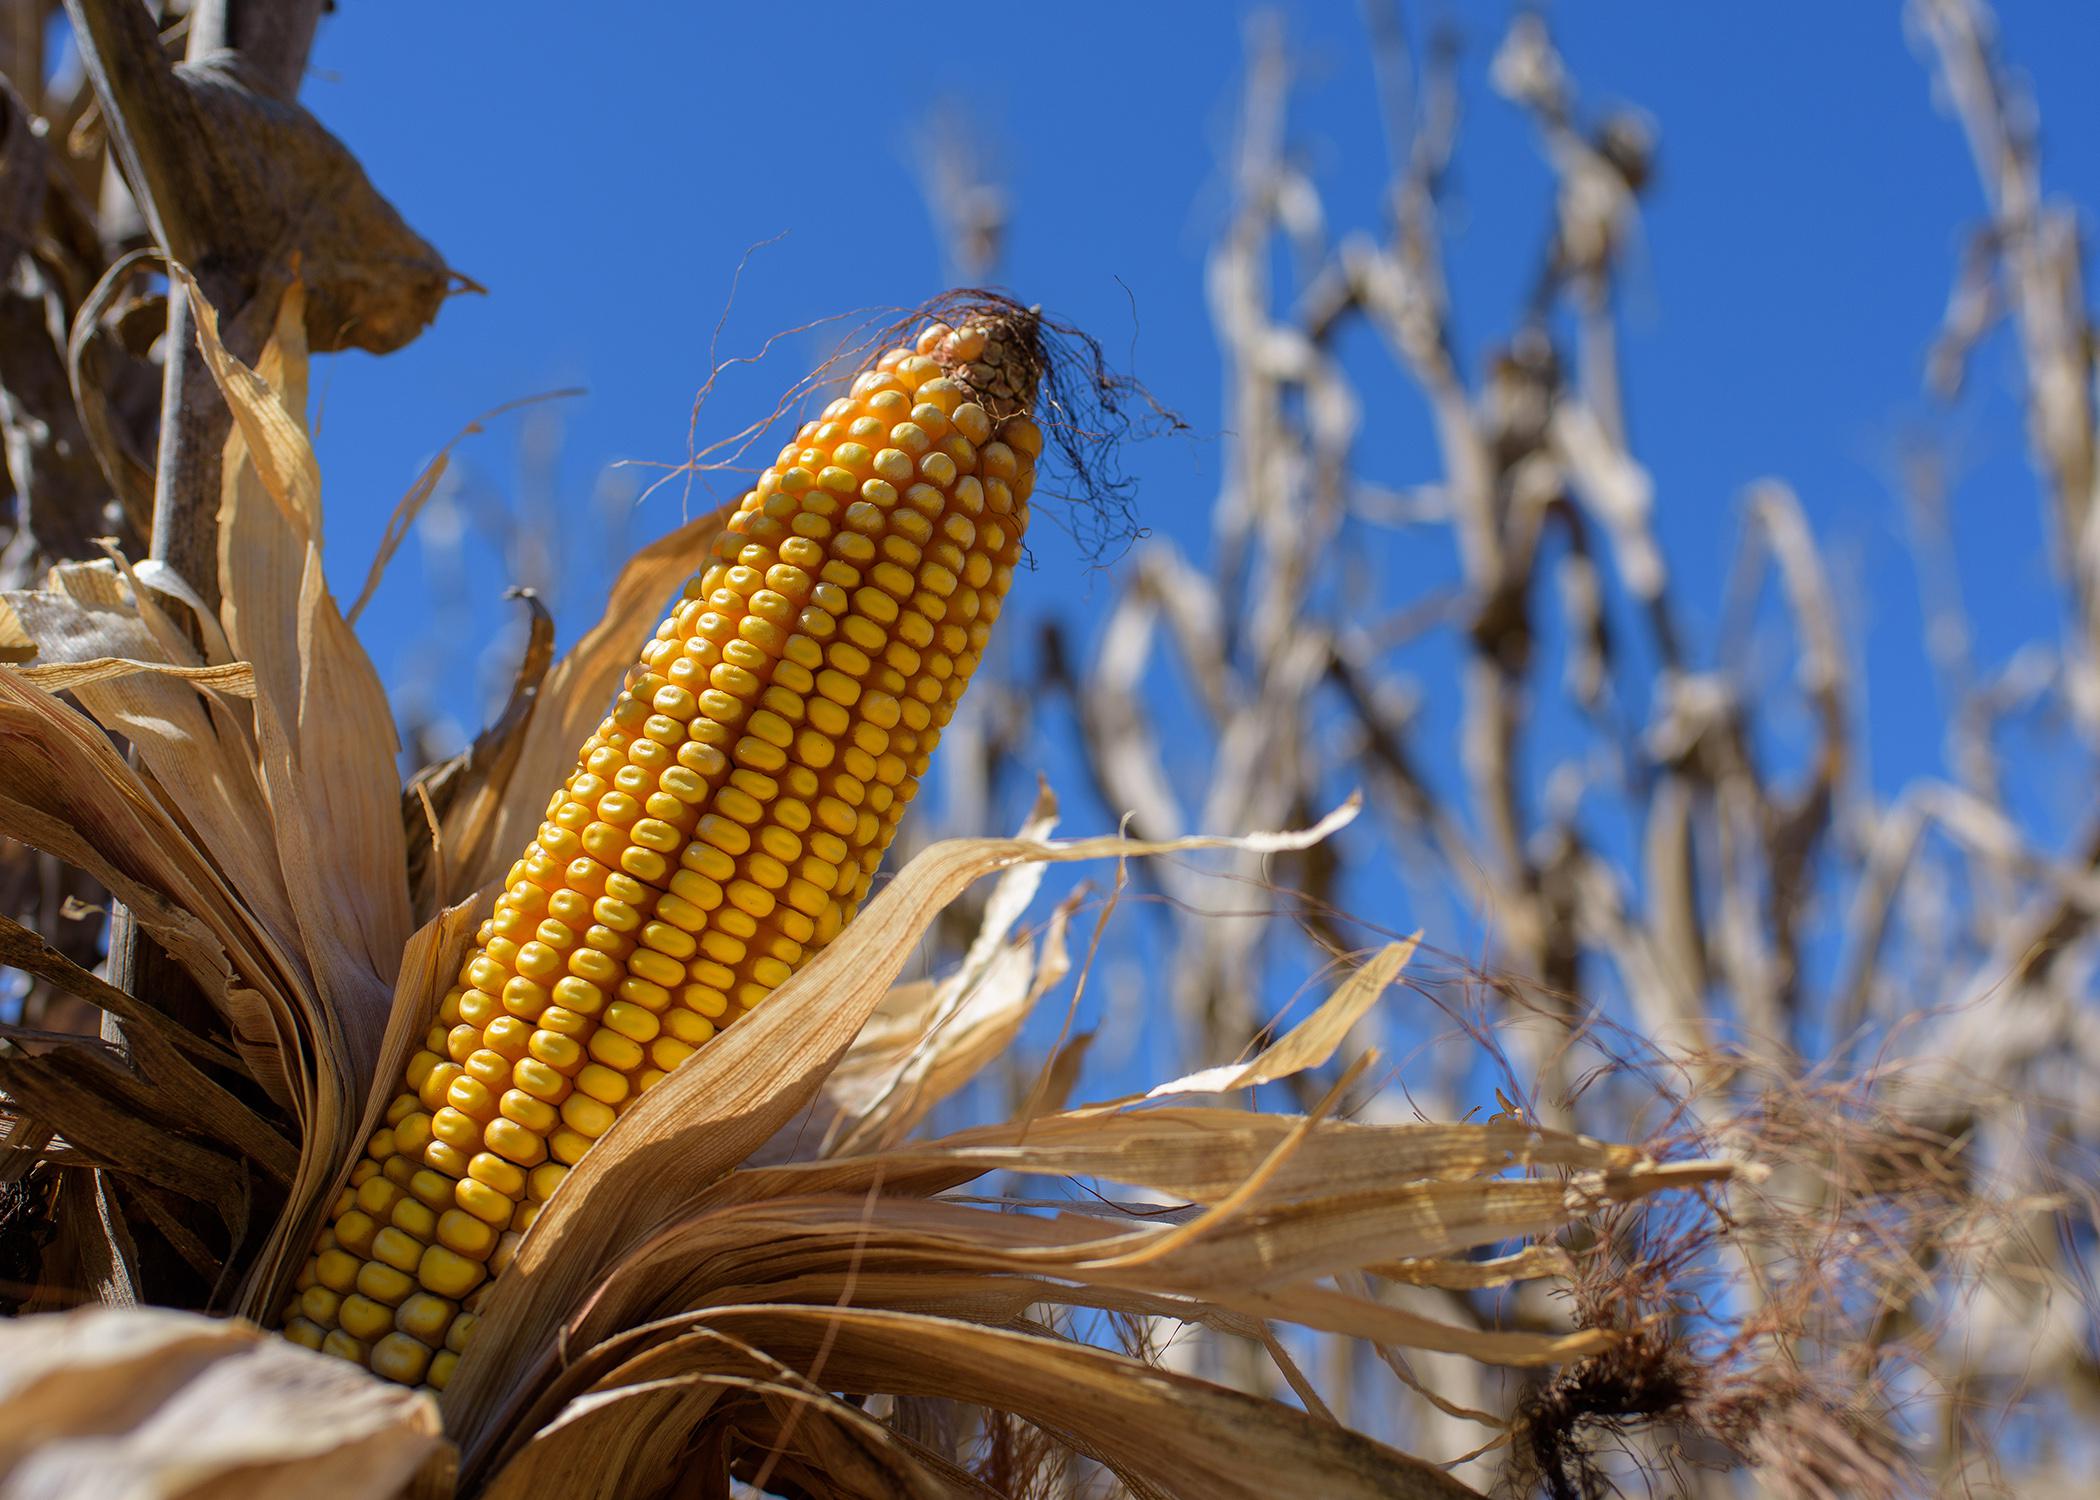 States mostly good corn crop nears harvests end Mississippi State University Extension Service